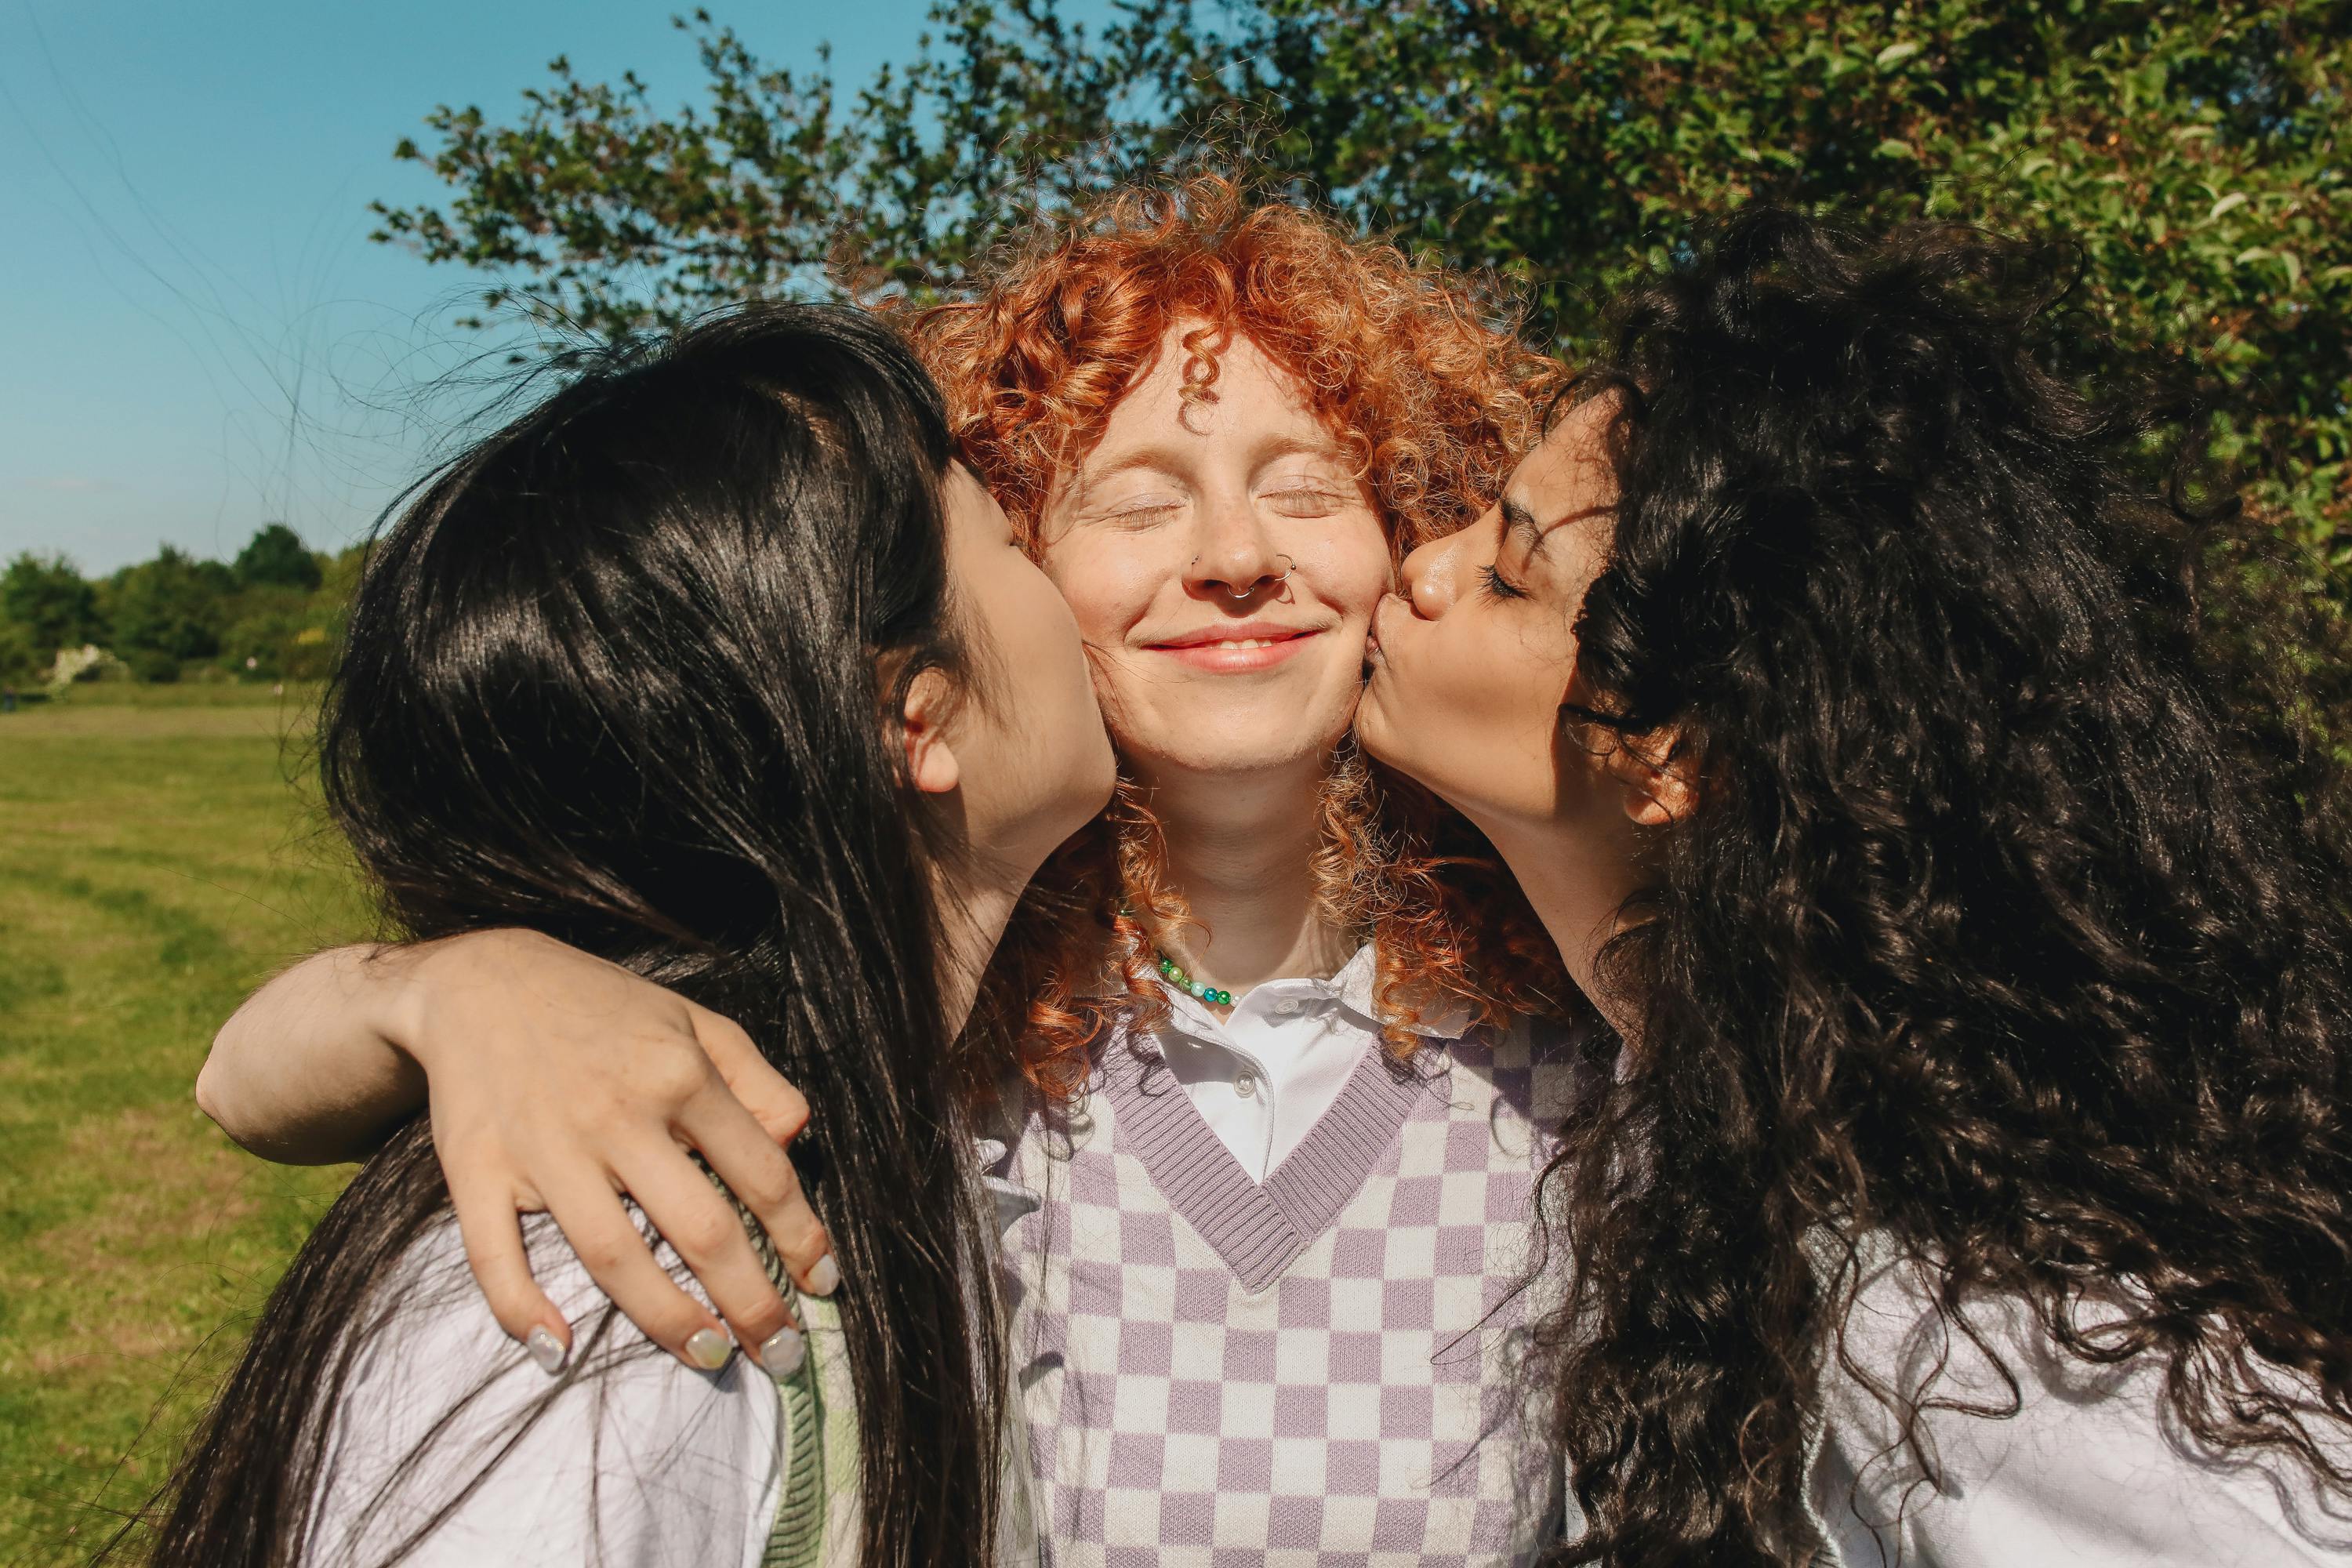 photograph of girls kissing their friend on the cheek